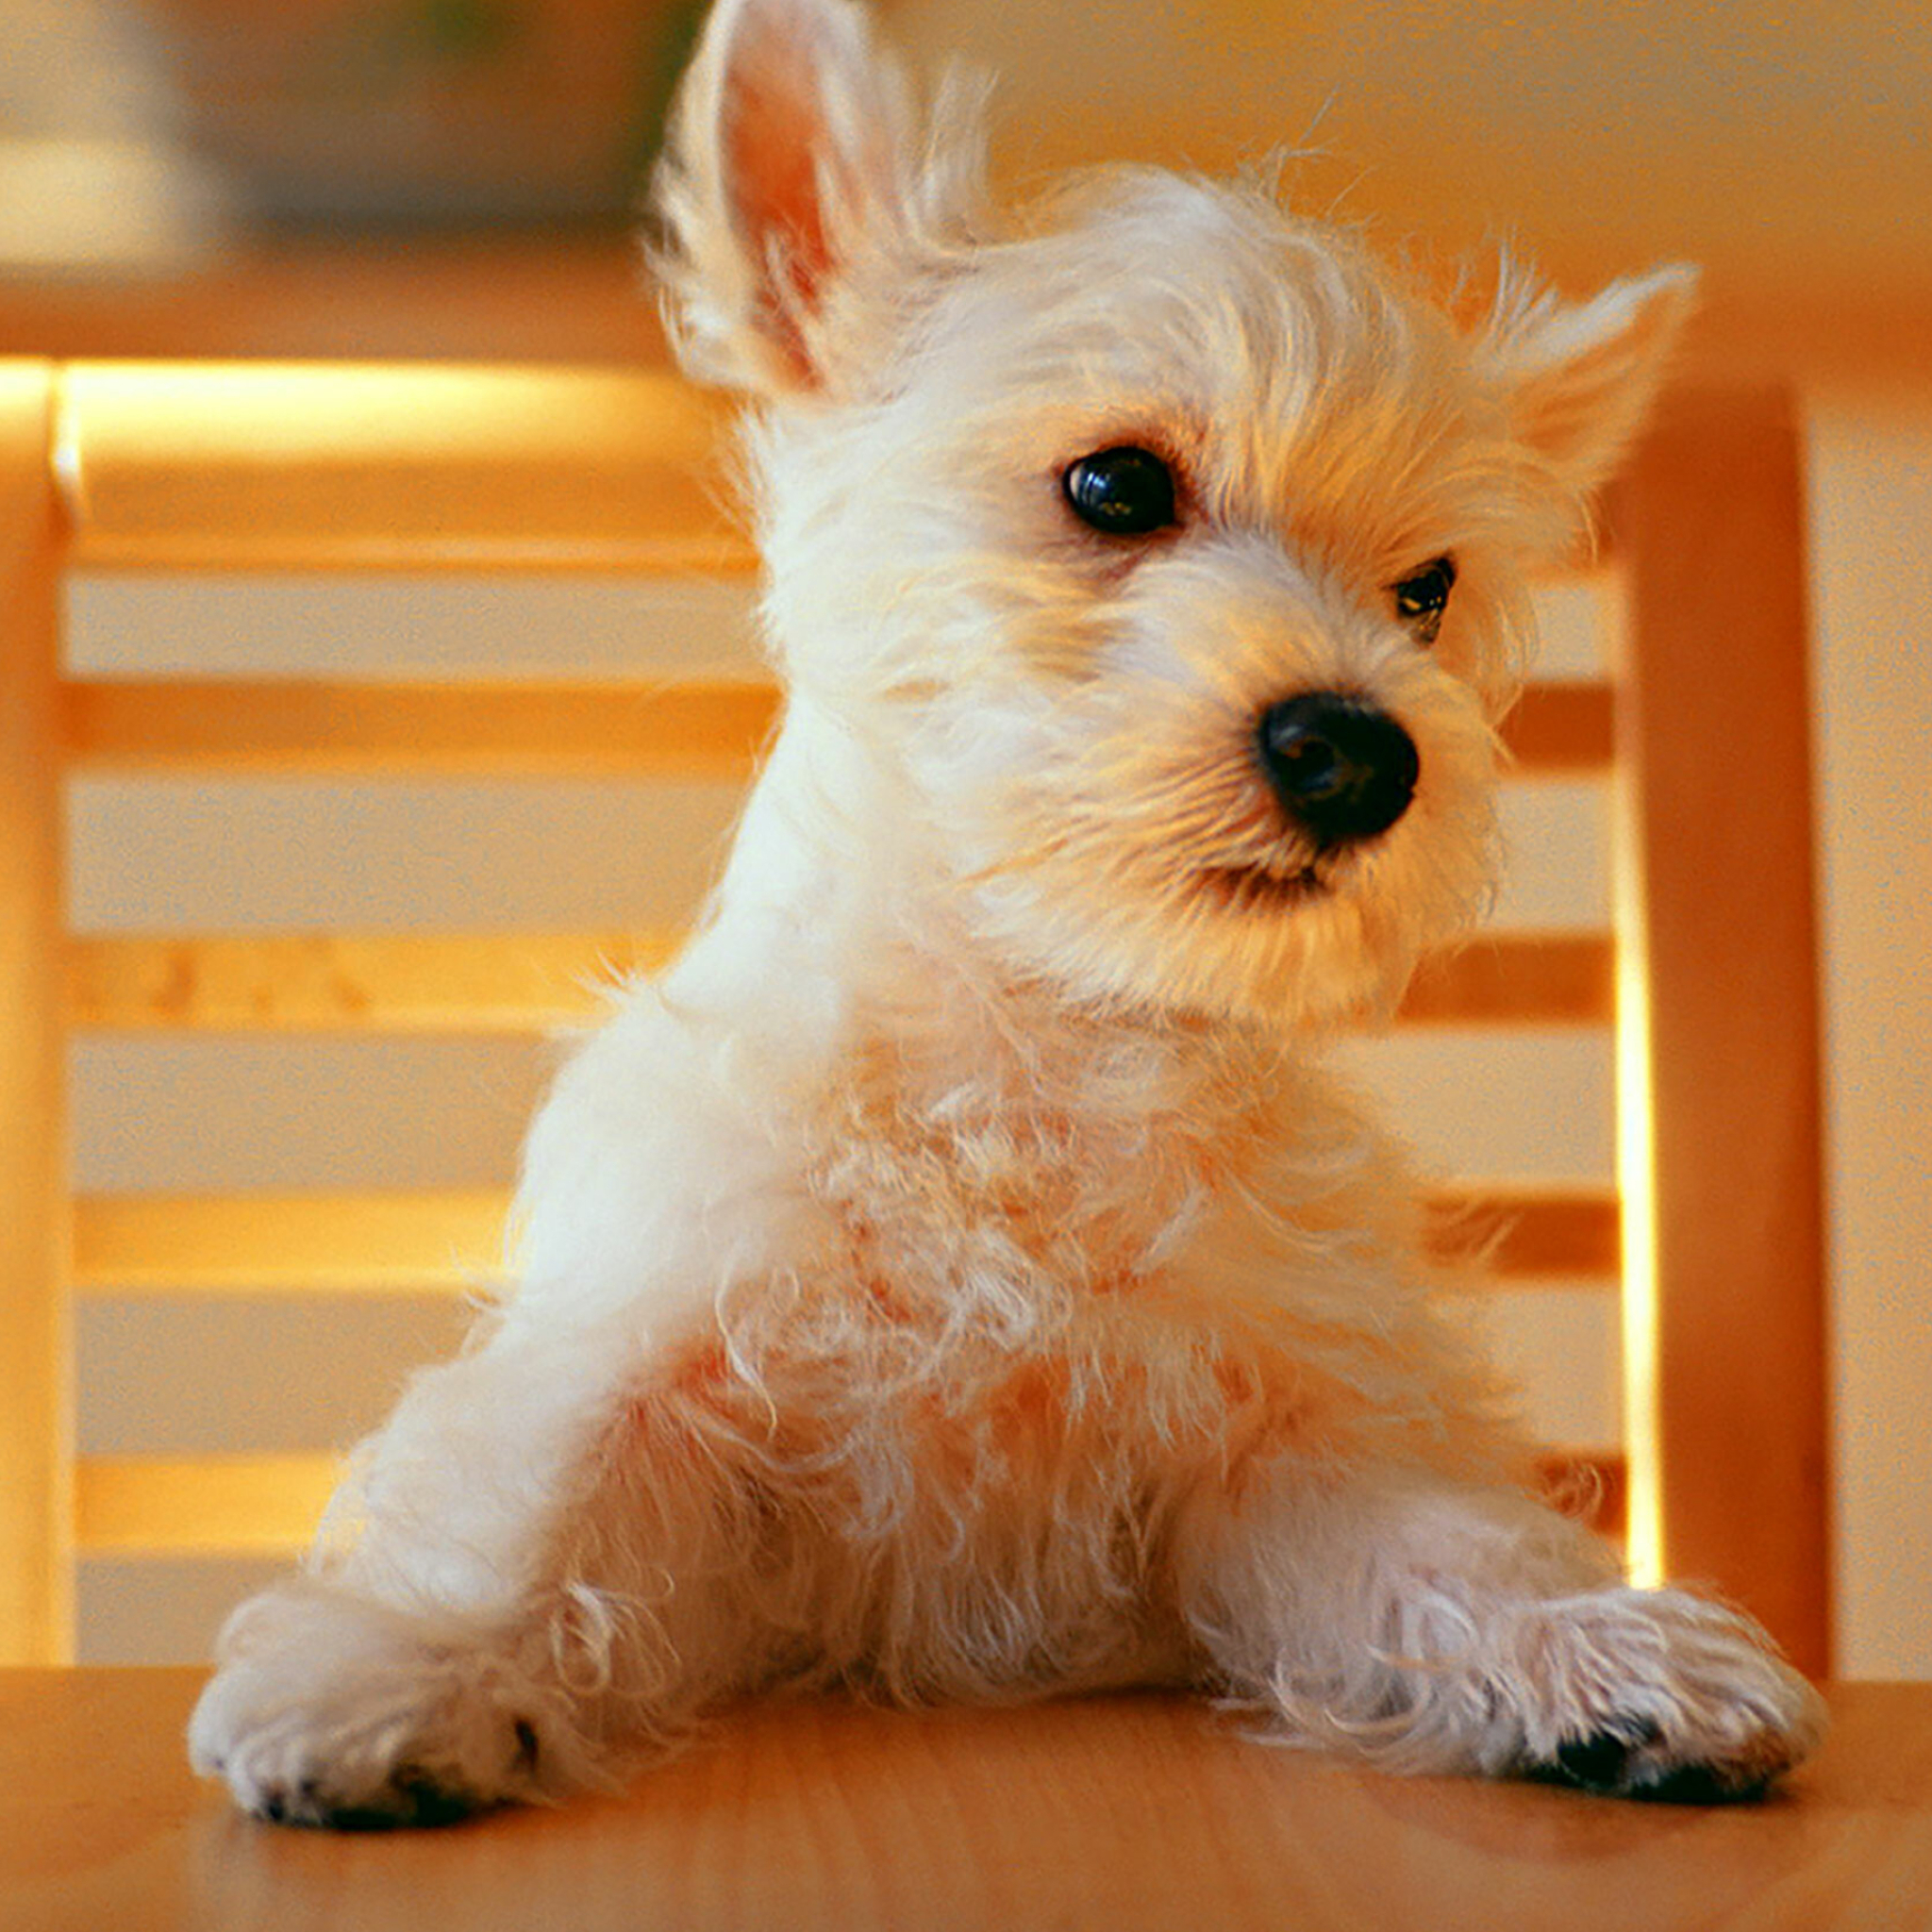 Dog: West Highland White Terrier, A breed from Scotland with a distinctive white harsh coat. 2050x2050 HD Wallpaper.